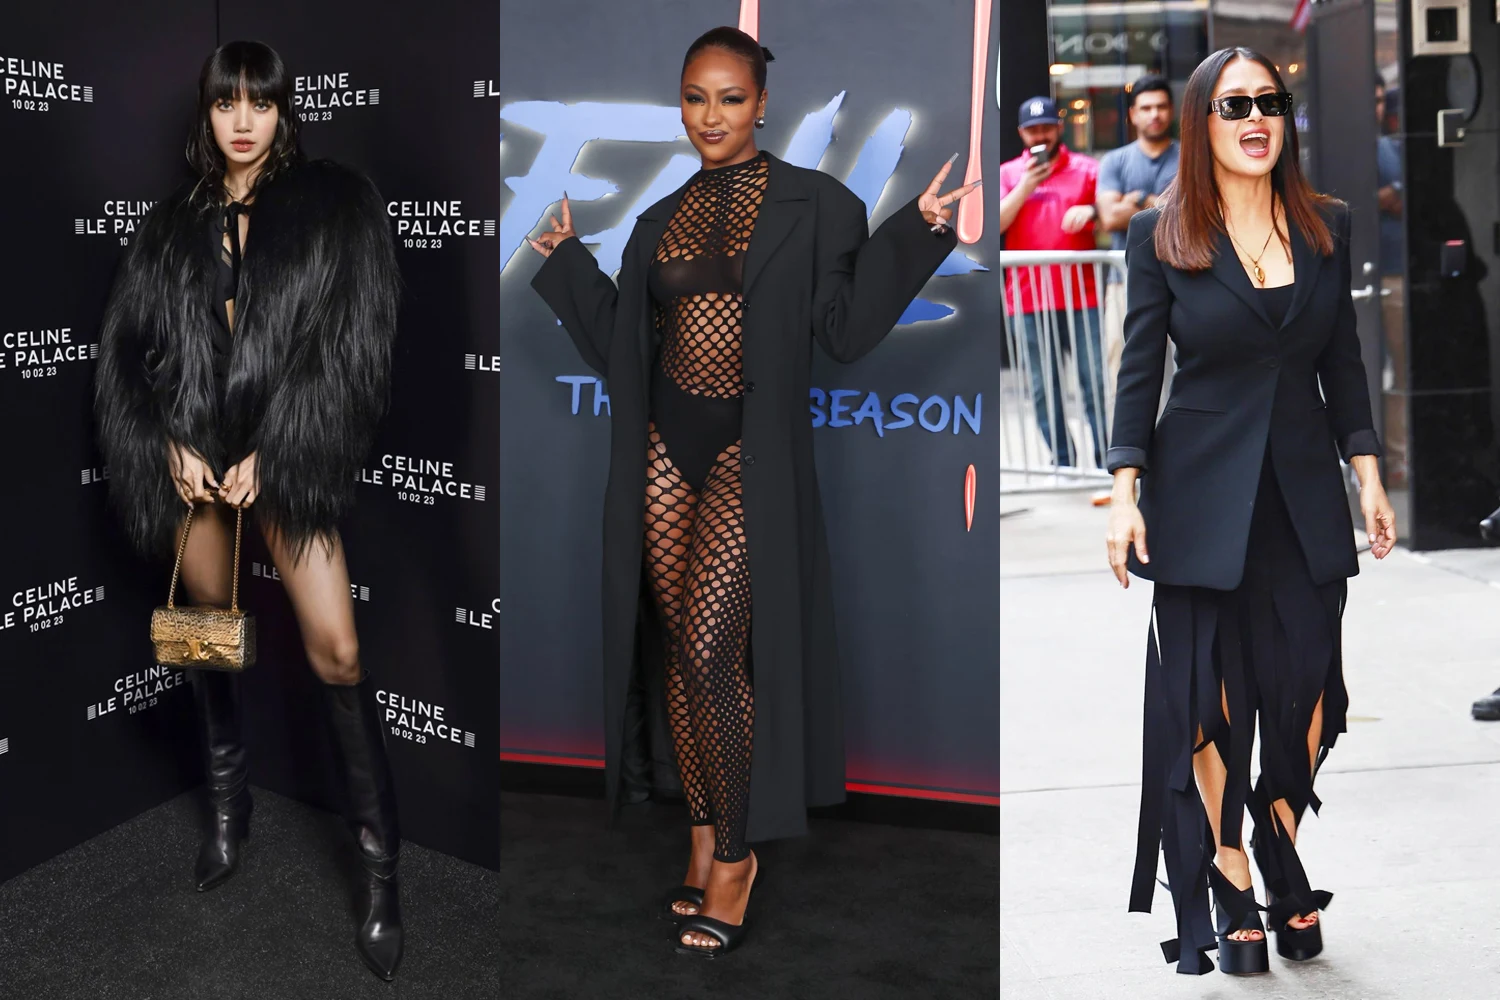 fashion collage with celebrities in all black outfits: Left to right: Lisa from Blackpink, Justine Skye, Salma Hayek